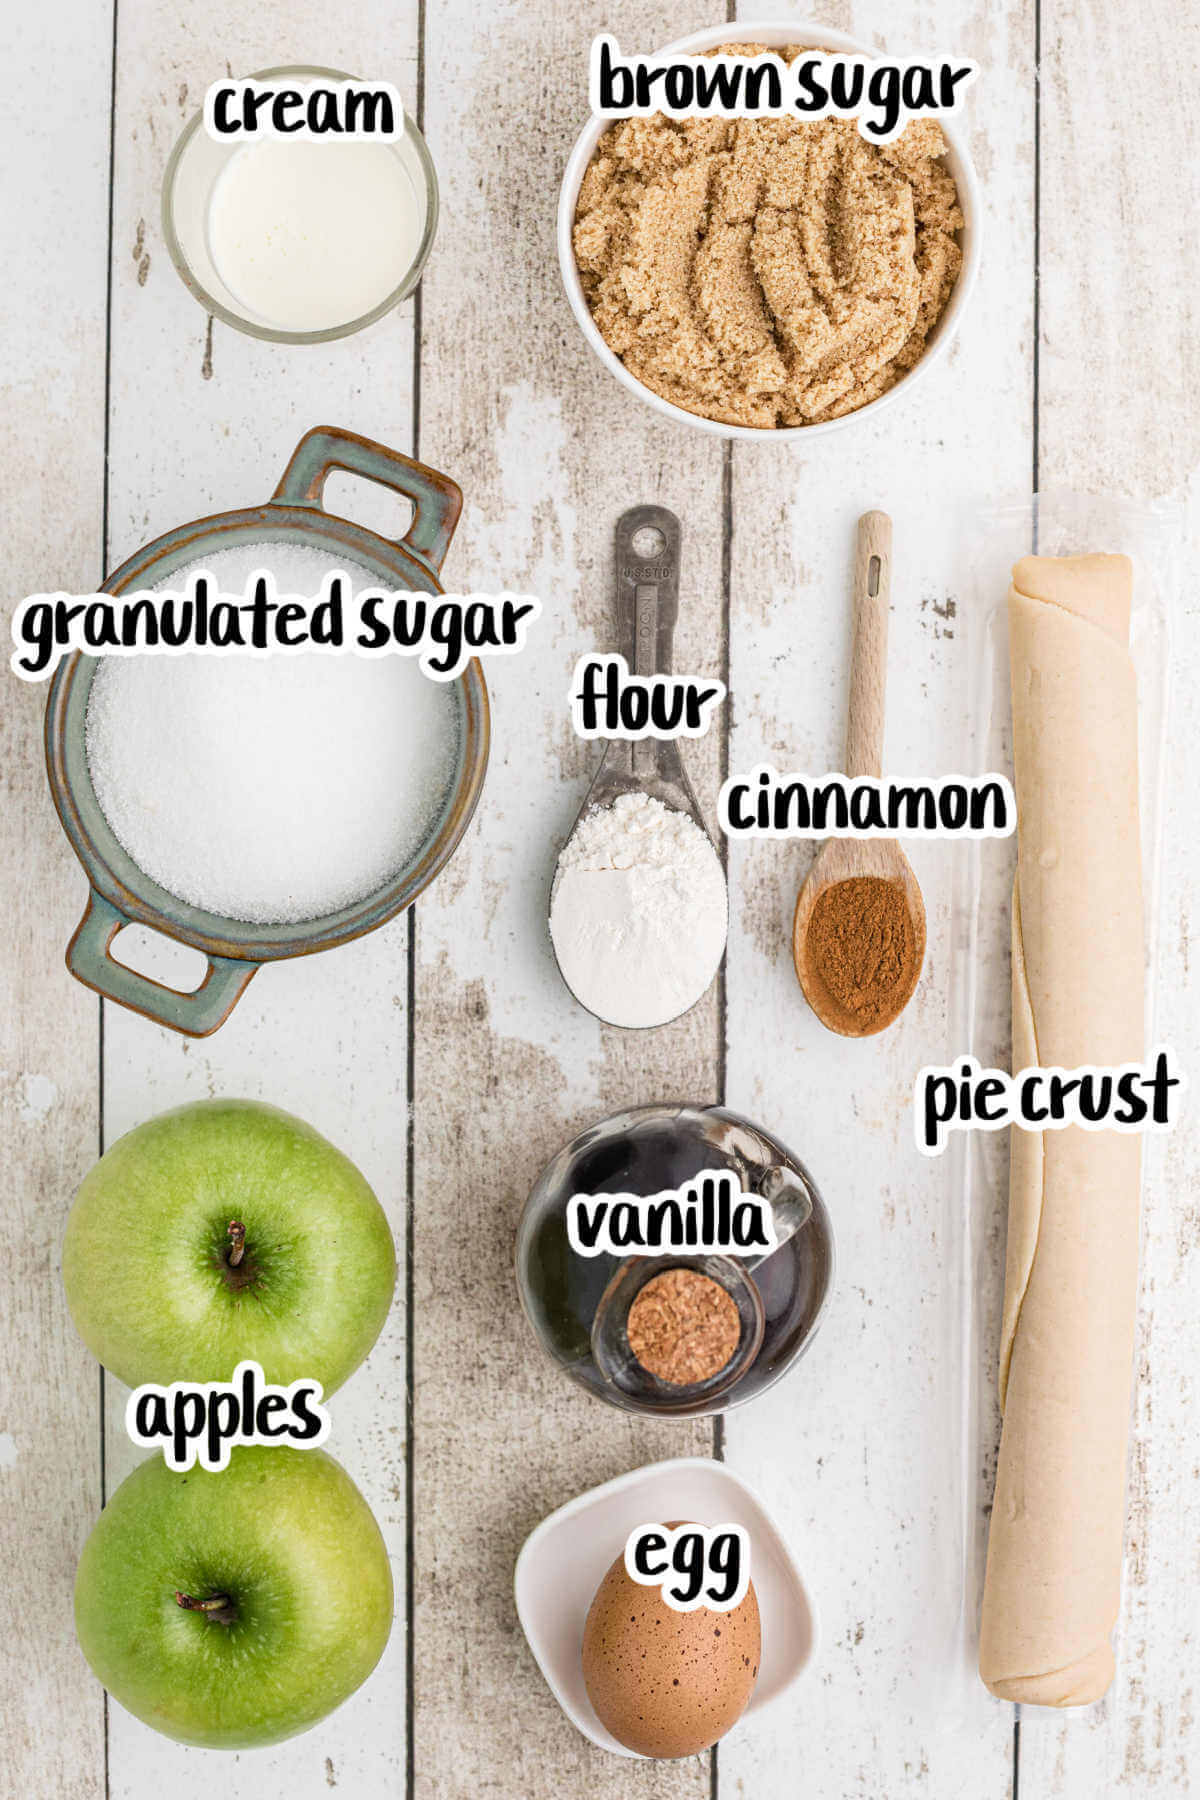 Image of the ingredients necessary to make a Homemade American Apple Pie Recipe. 